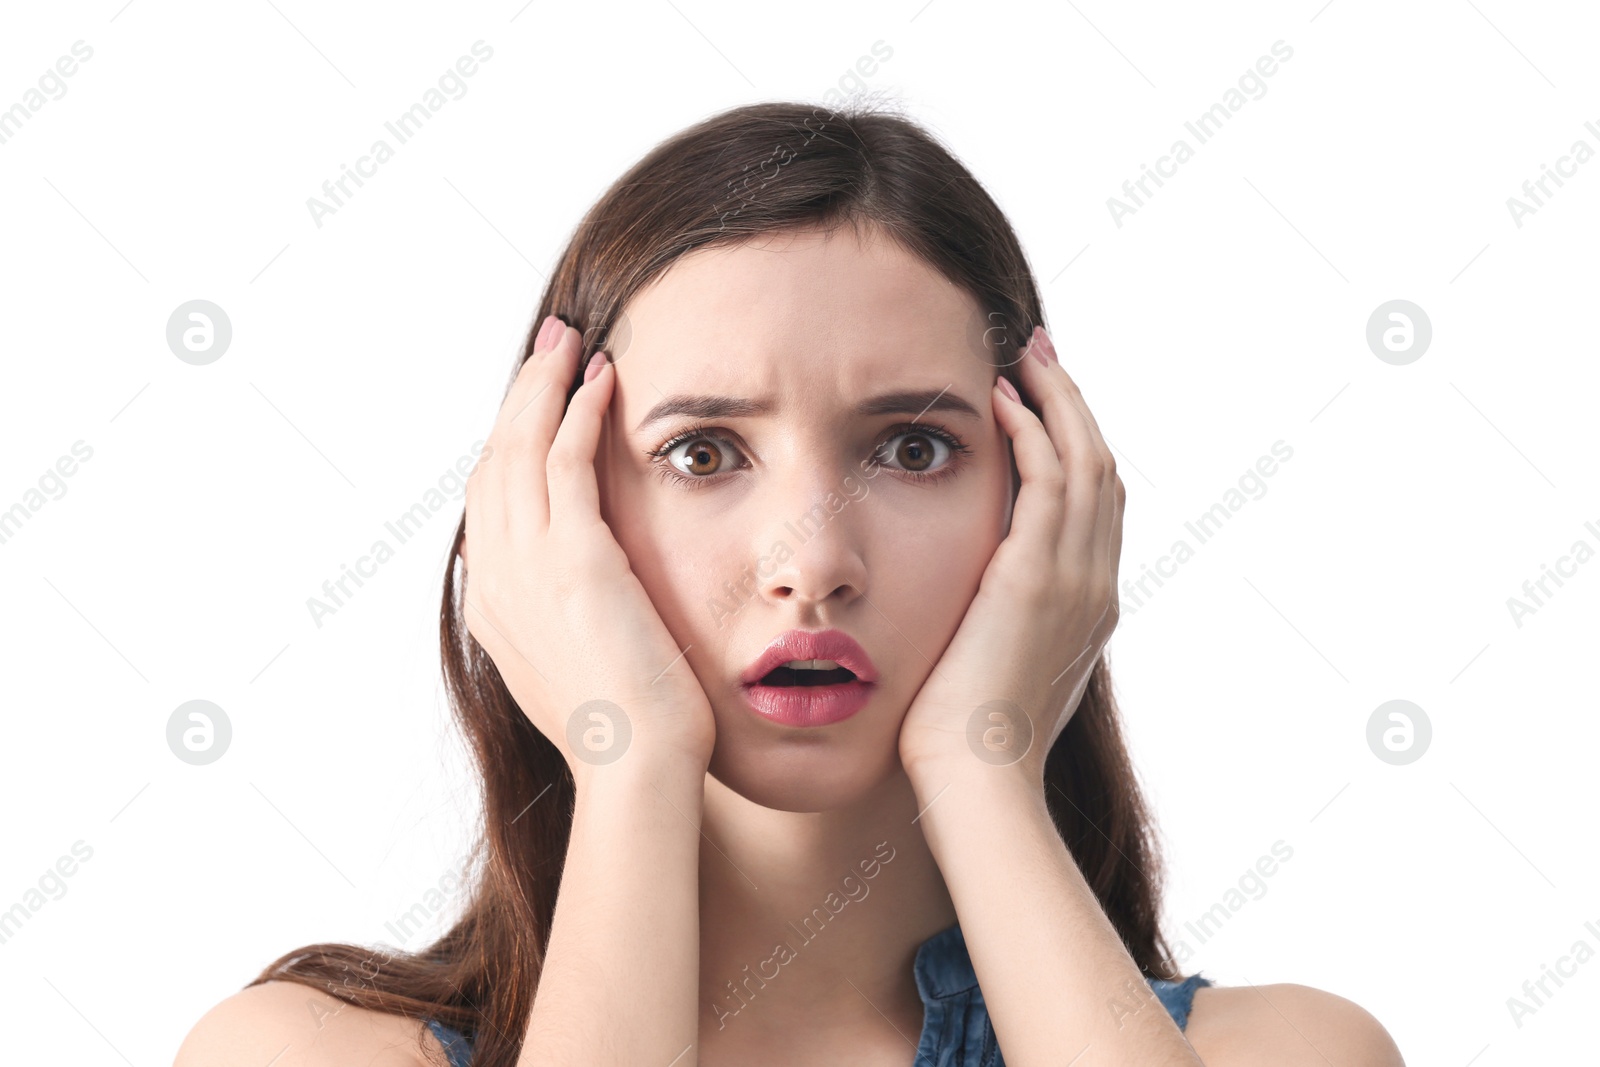 Photo of Teenage girl with acne problem against white background